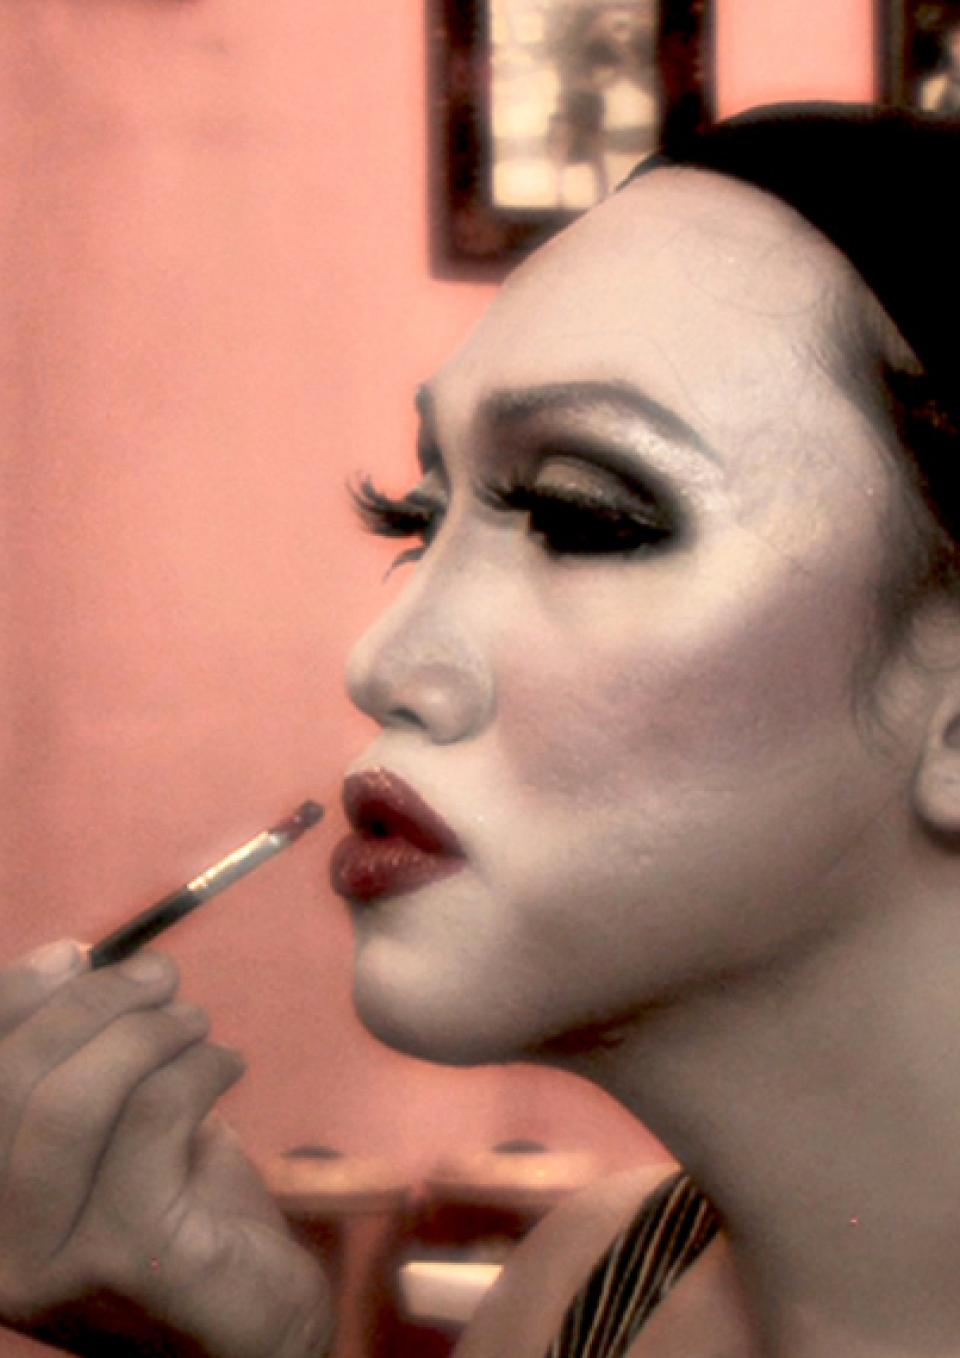 Profile image of a transgender woman in Indonesia. She focuses on her face in the mirror as she paints her lips. She has dramatic eye makeup and her hair pulled back under a cap.